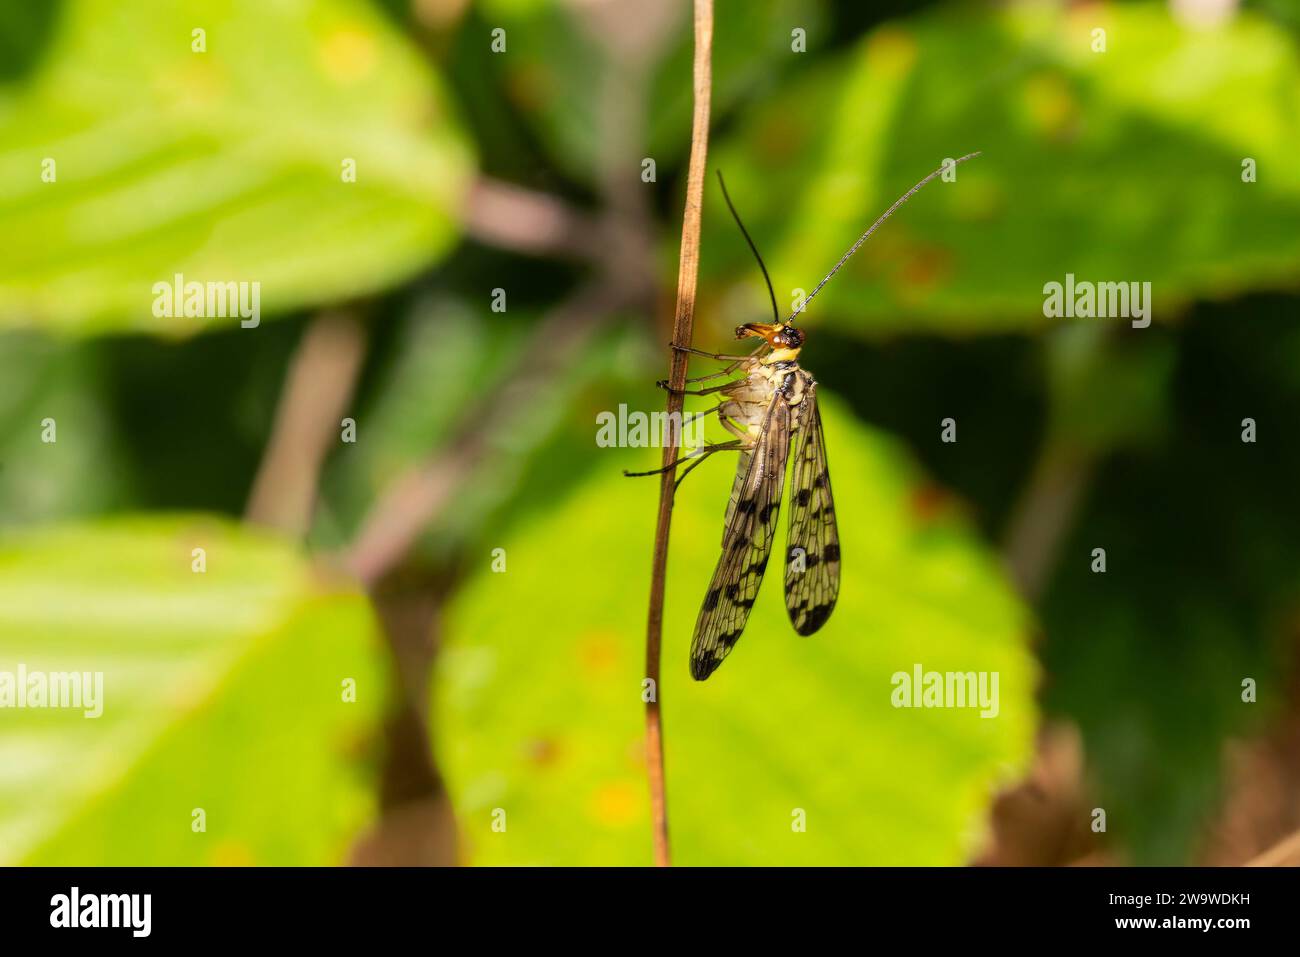 Common Scorpion Fly (Panorpa communis) an abundant harmless insect species found in the UK and Europe, stock photo image Stock Photo